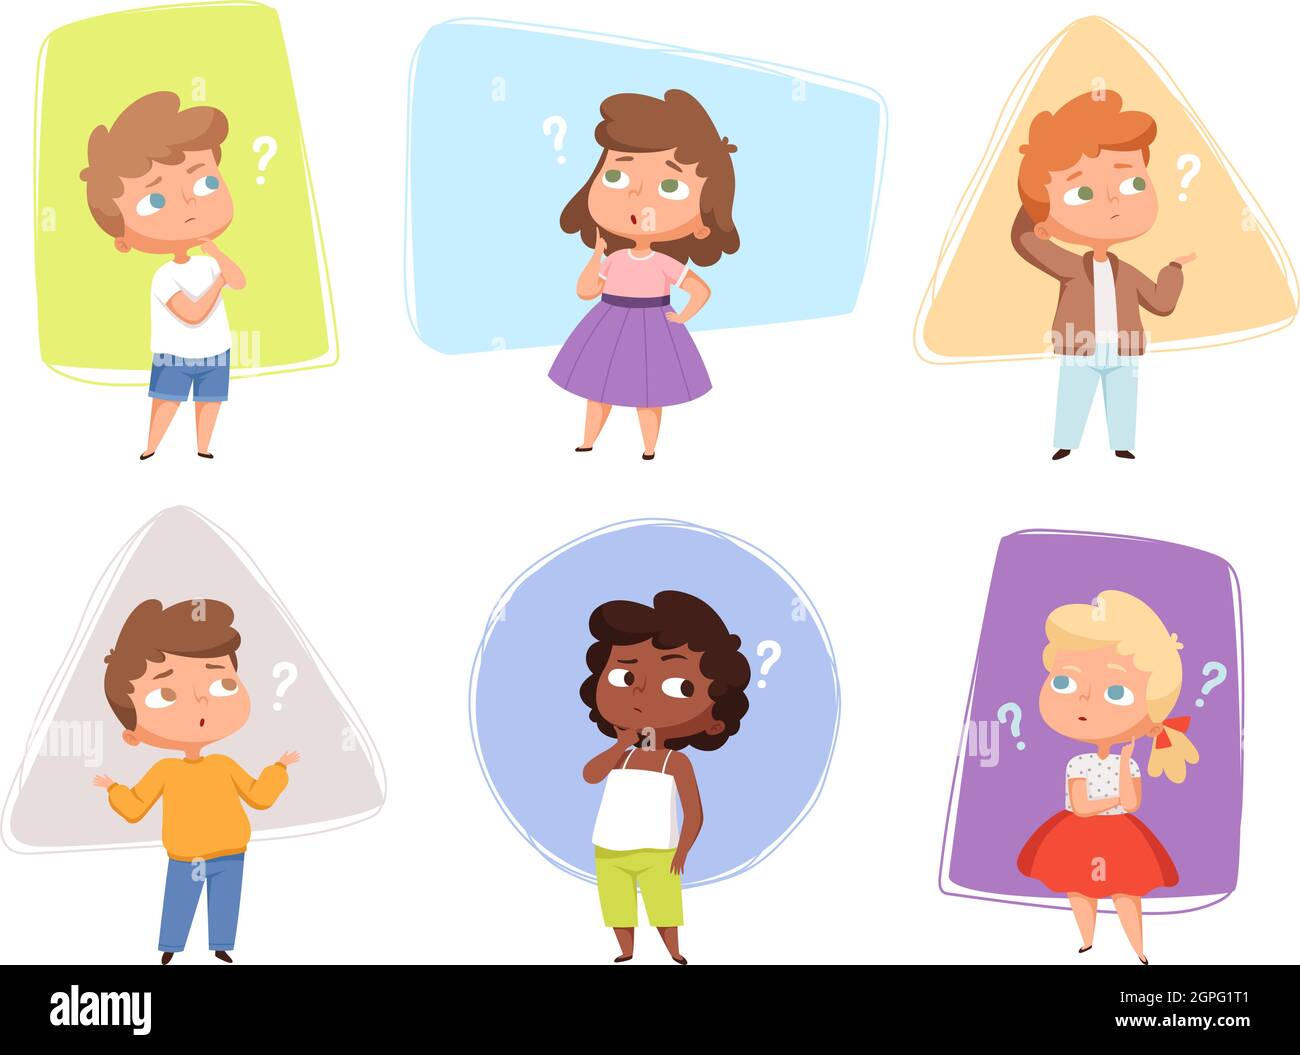 Thinking kids. Children asking question expression and question marks teens vector characters Stock Vector